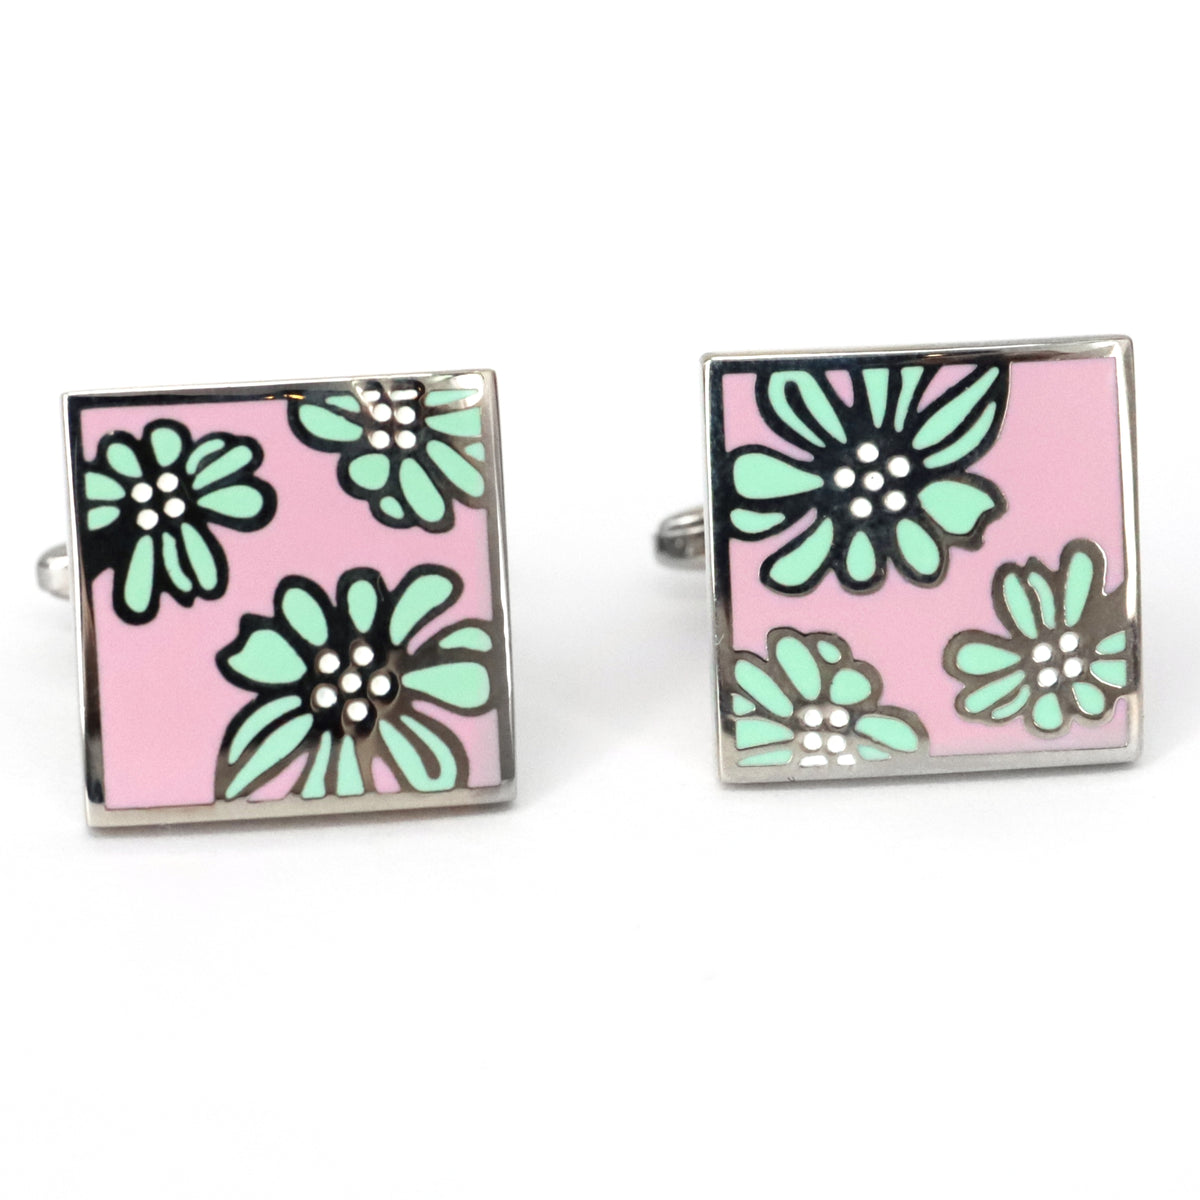 Square Floral Cufflinks in Pink and Blue